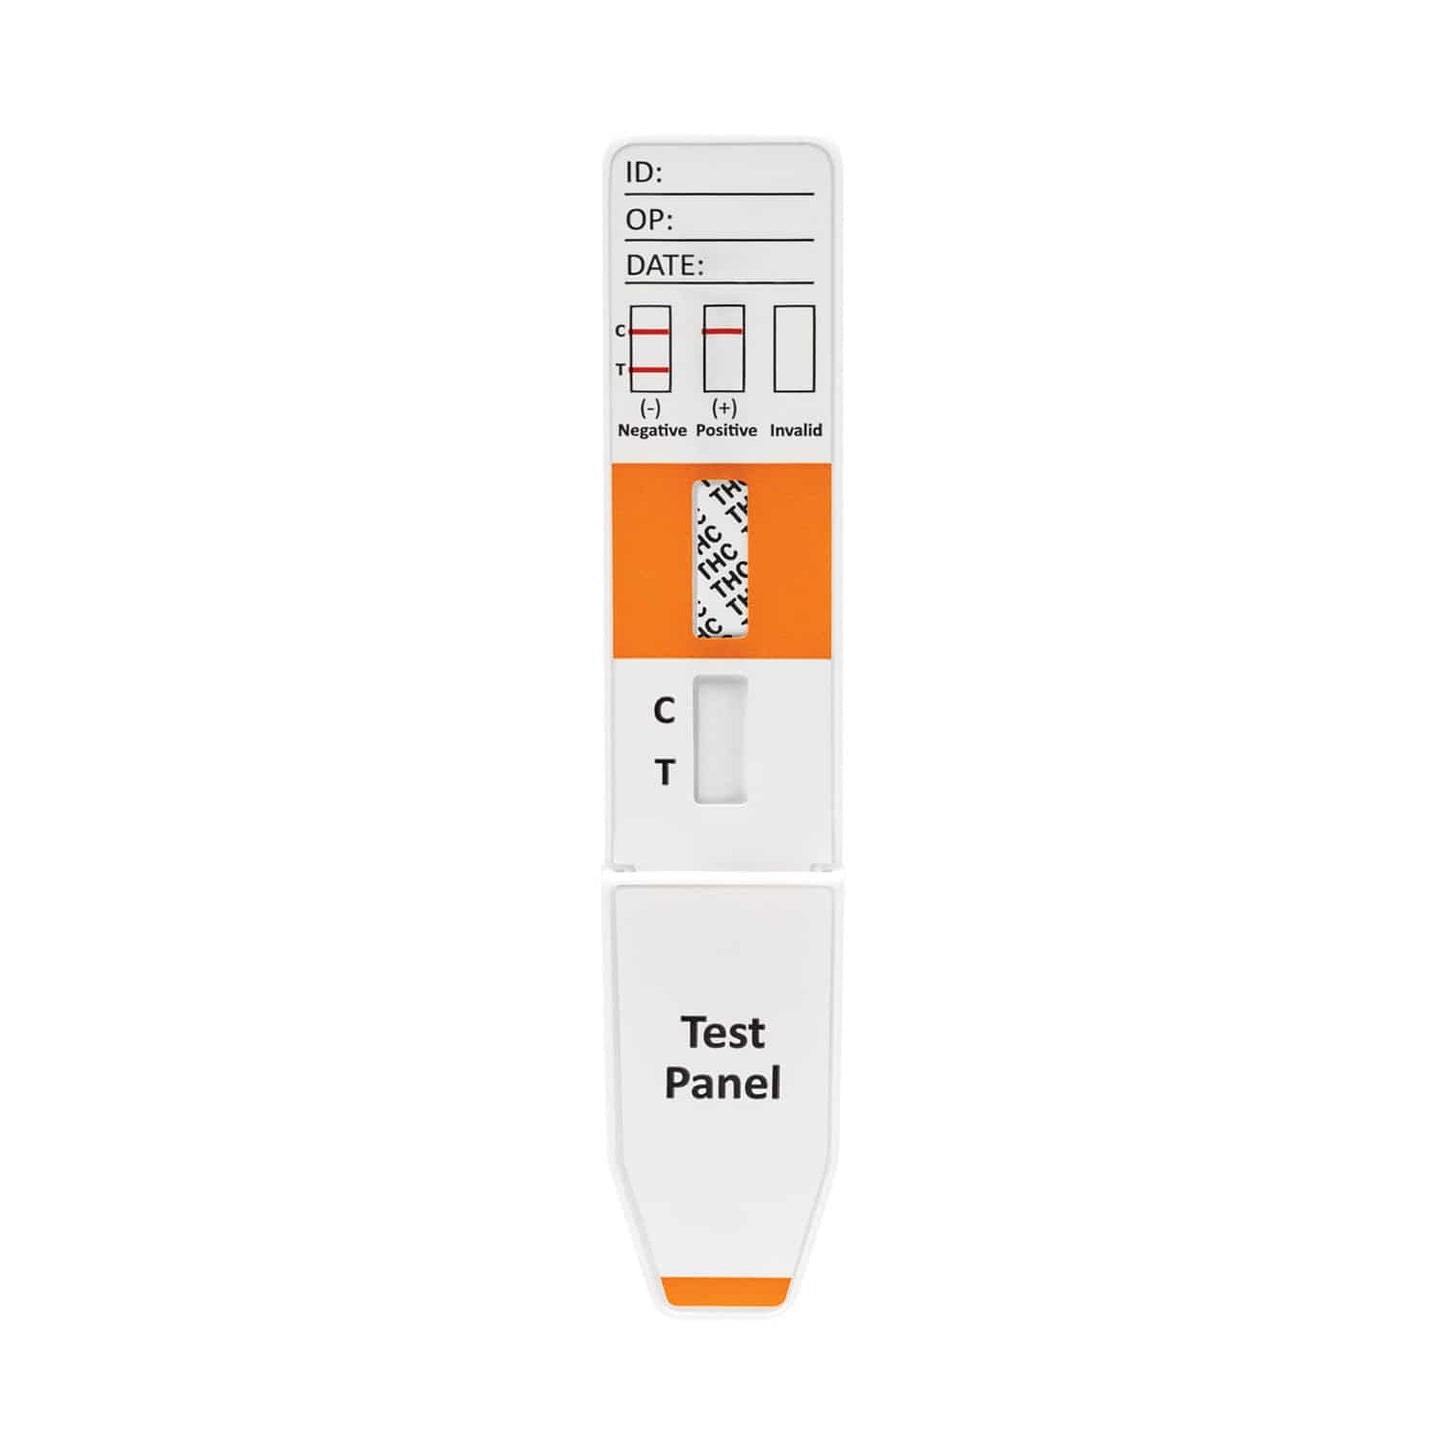 Surestep™ Powder Test Drug Screen Panel (Amp) For The Detection Of Amphetamine On Surfaces And In Solids (Image Differs From Product)